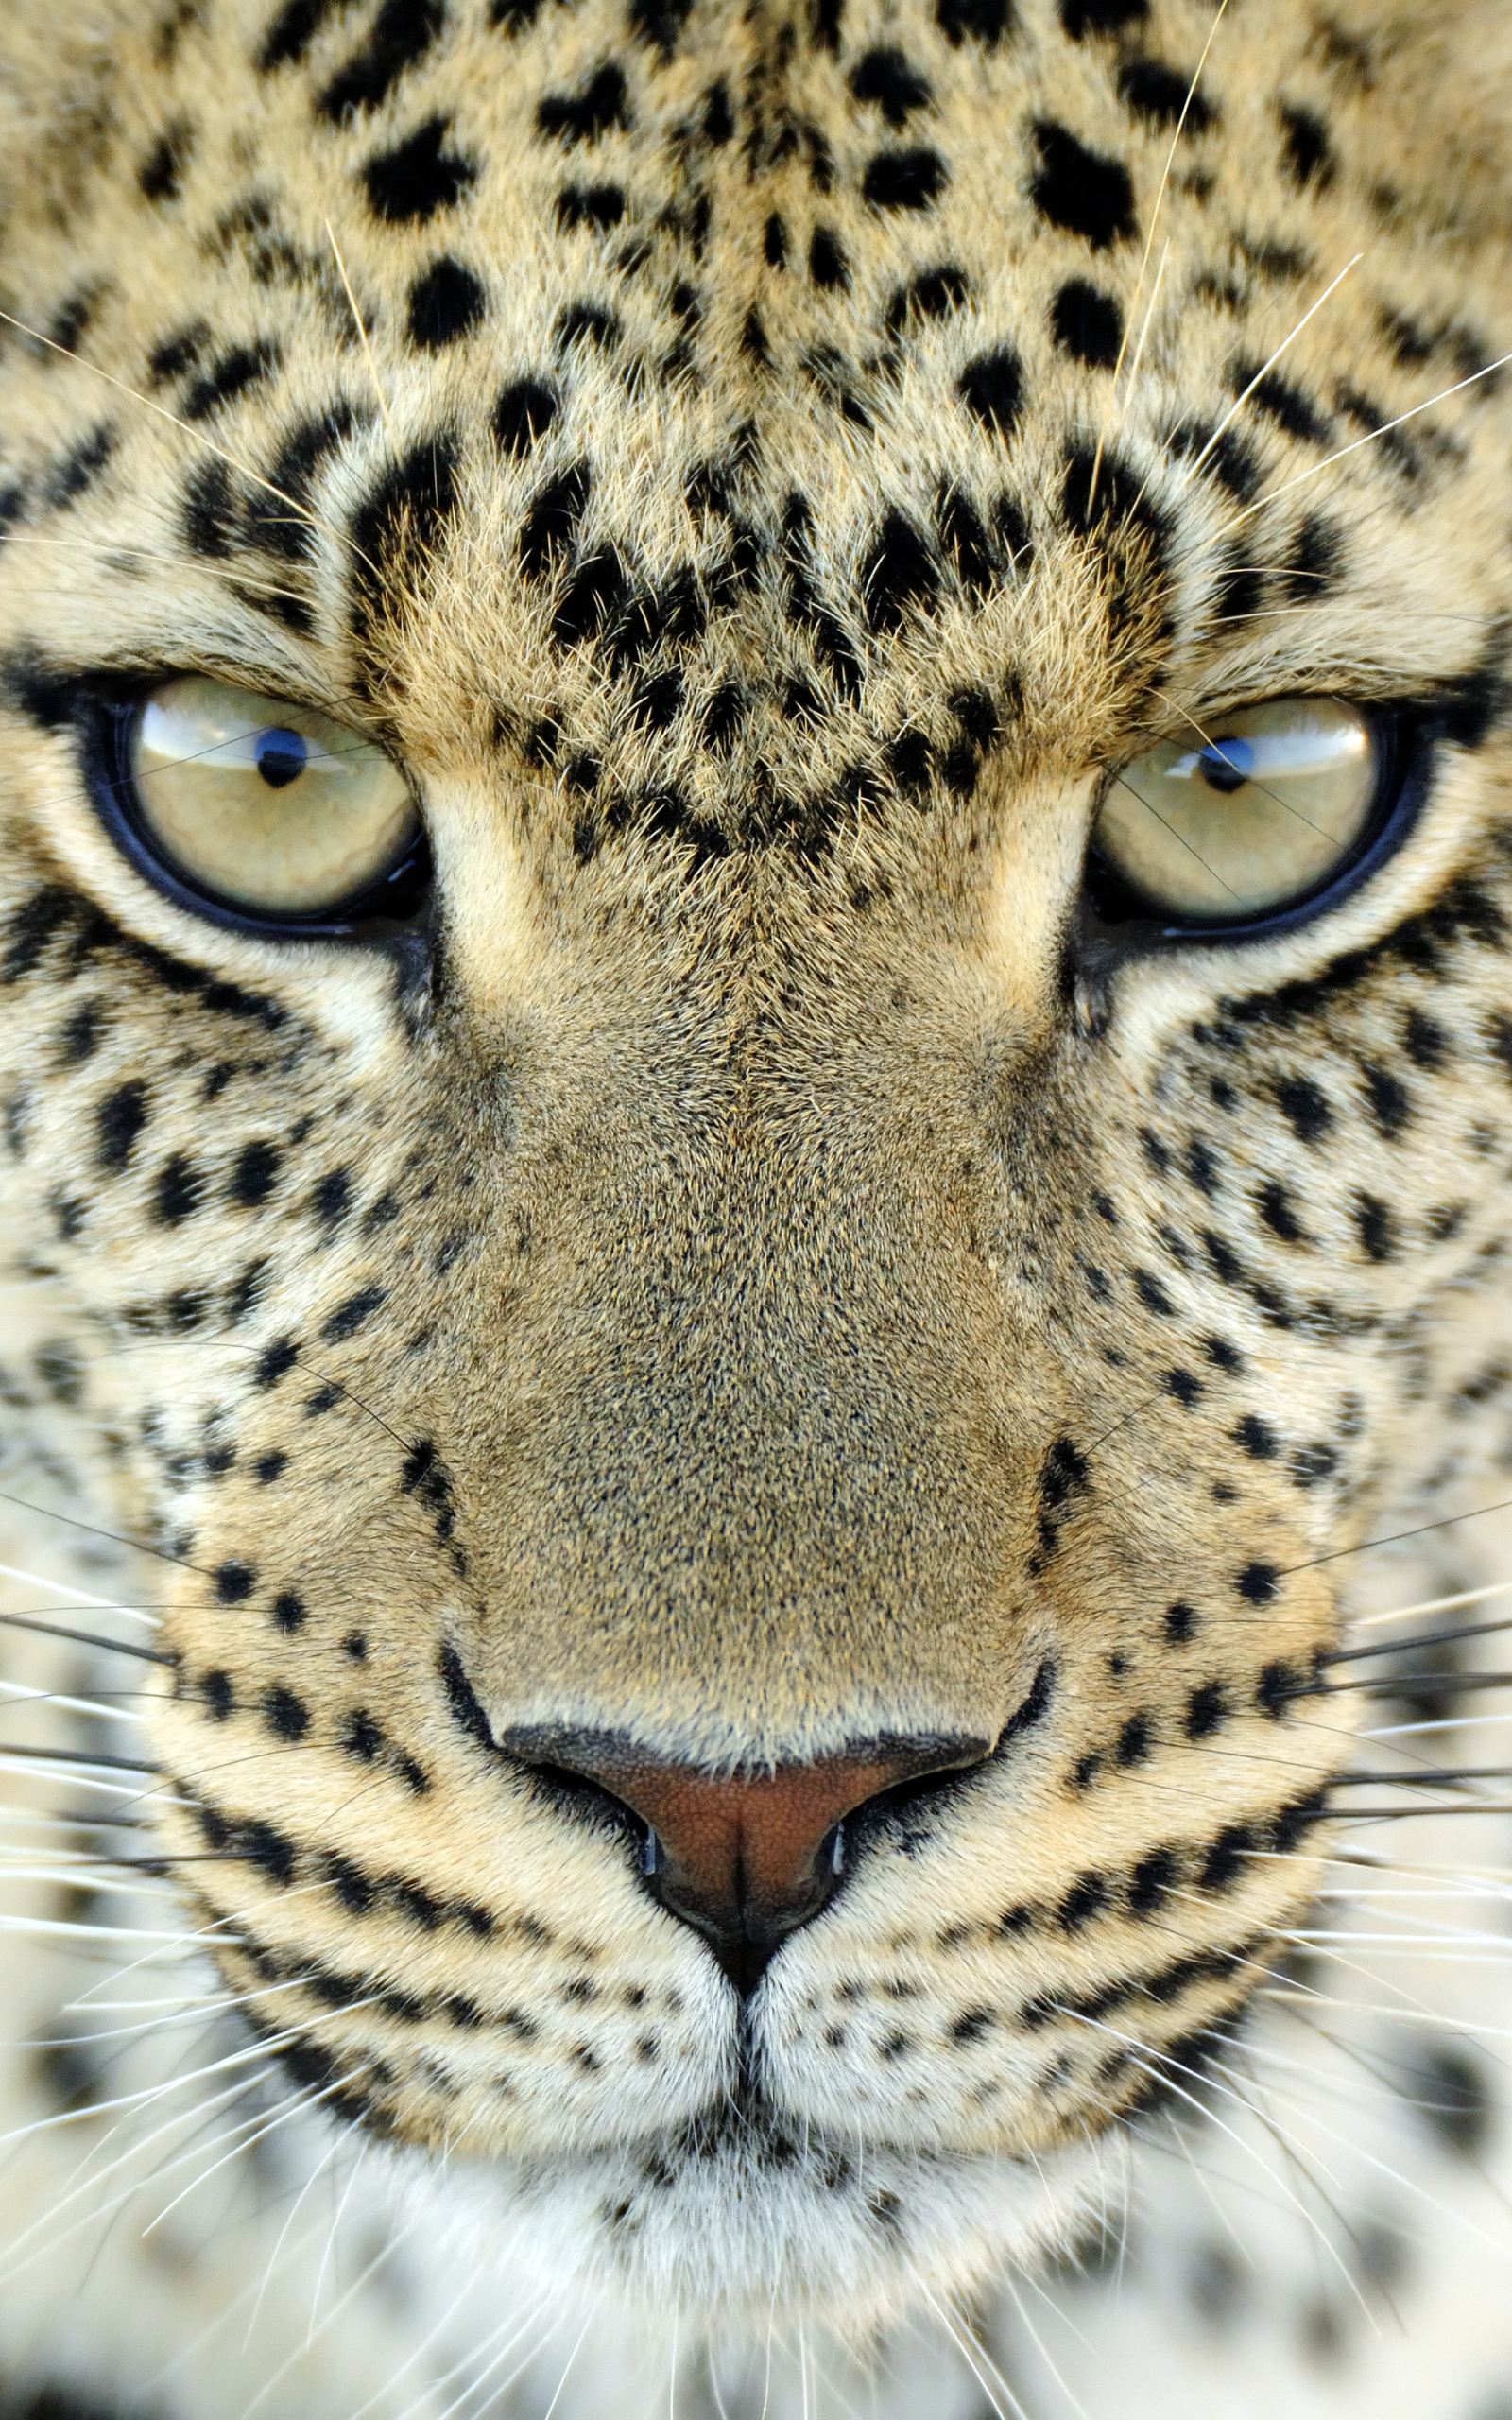 Leopard Phone Wallpaper - Mobile Abyss